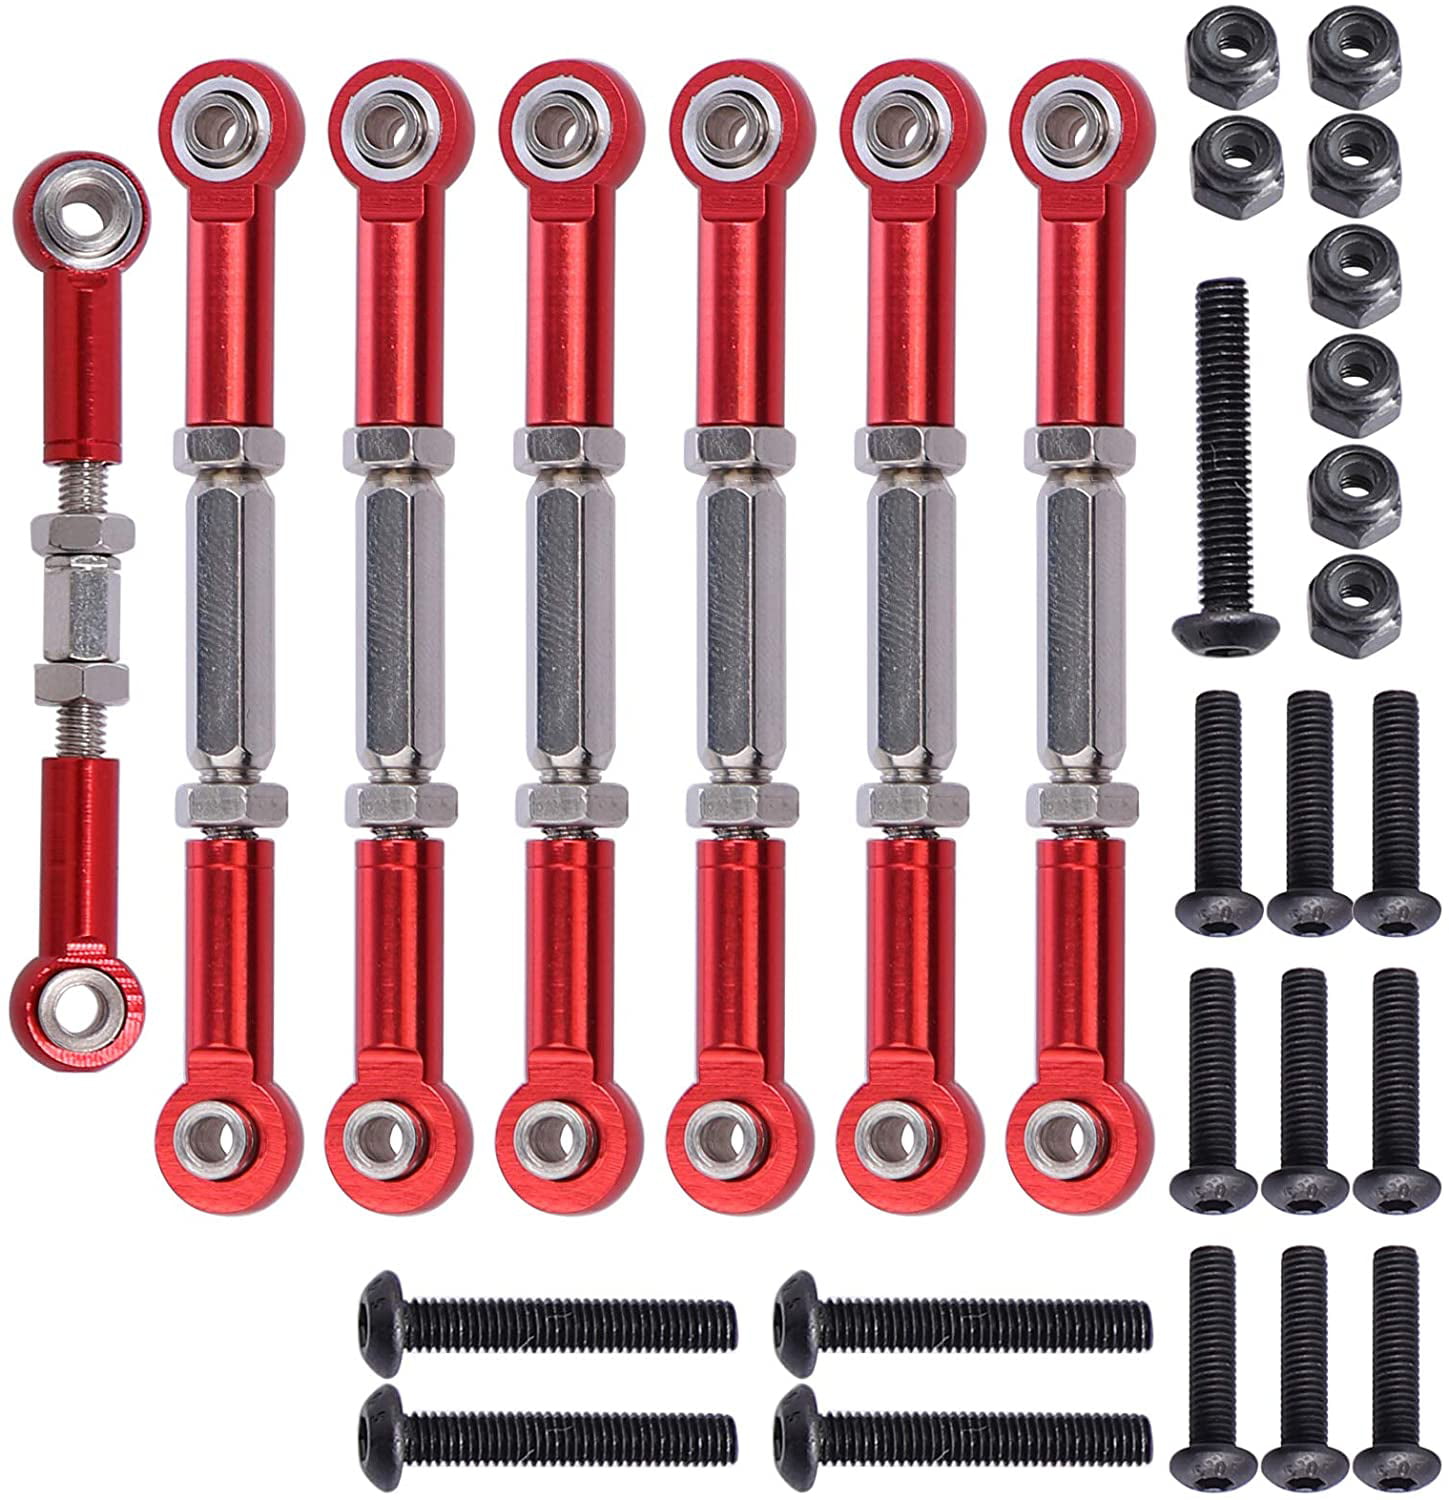 2WD Short Course Upgrade Parts 1:10 Adjustable Aluminum Turnbuckles Camber Link Rod Ends Sets for 1/10 Traxxas Slash 4X4 